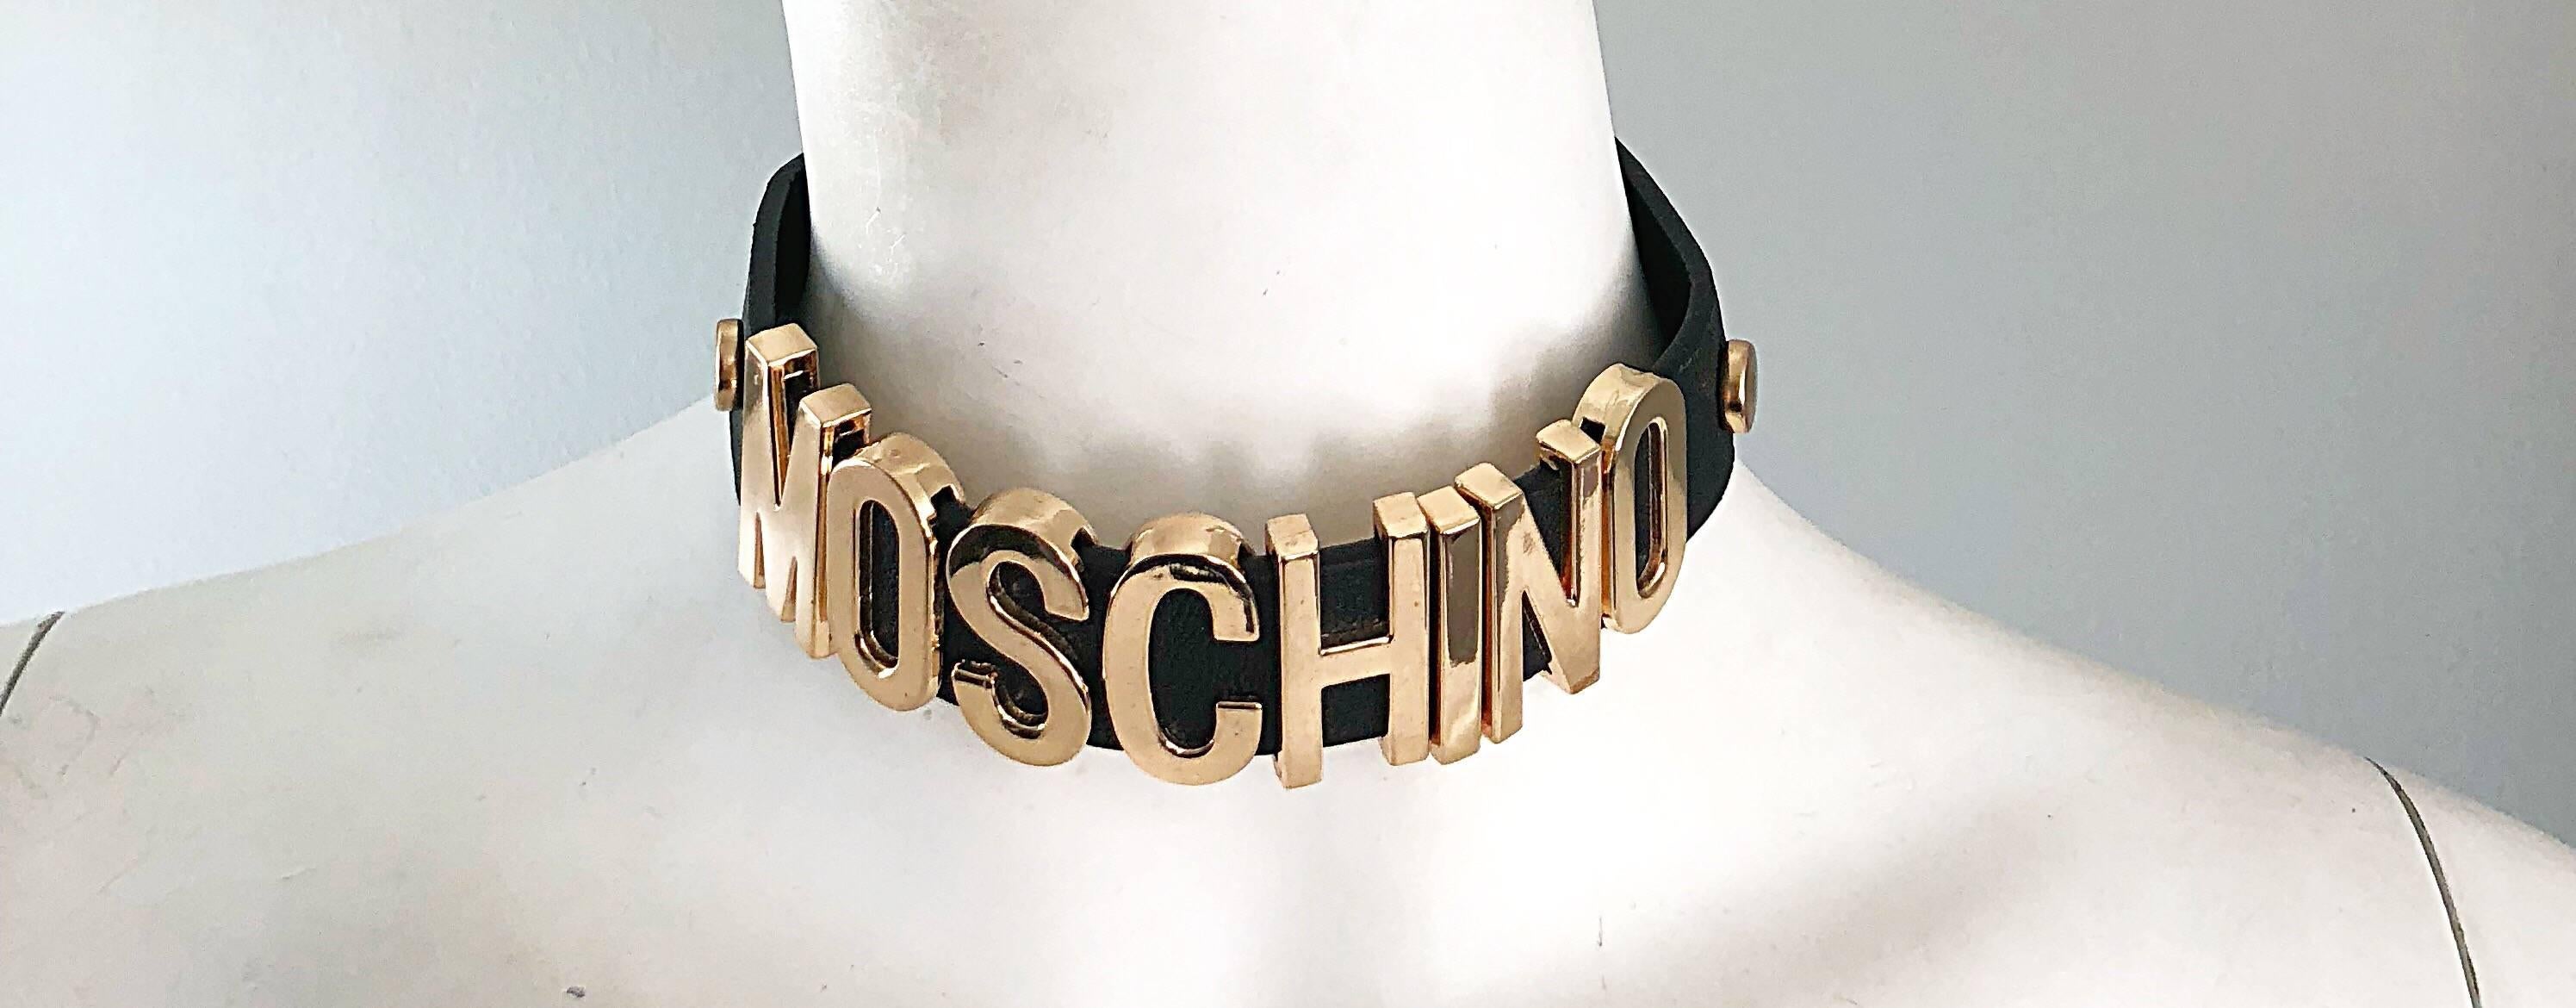 Amazing late 90s MOSCHINO black leather and gold logo mania choker necklace! Features gold metal letters that spell out Moschino with gold metal studs at each side. Two hidden adjustable snaps on the back. 
Can easily be dressed up or down. Great